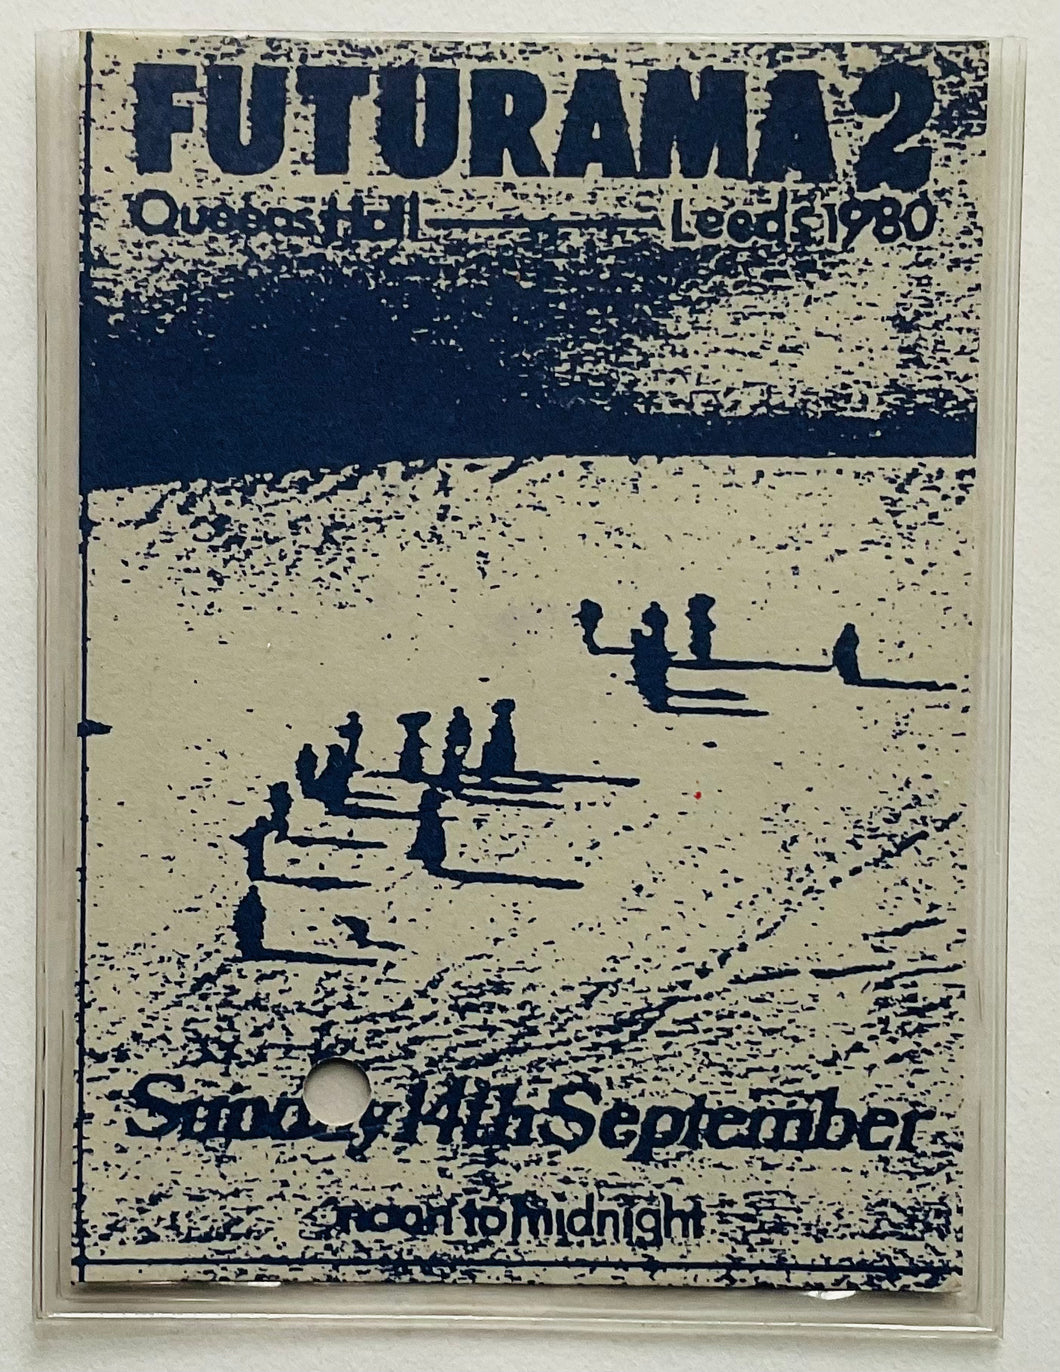 Psychedelic Furs Simply Red ABC  Original Concert Ticket Futurama 2 Queens Hall Leeds 14th Sep 1980